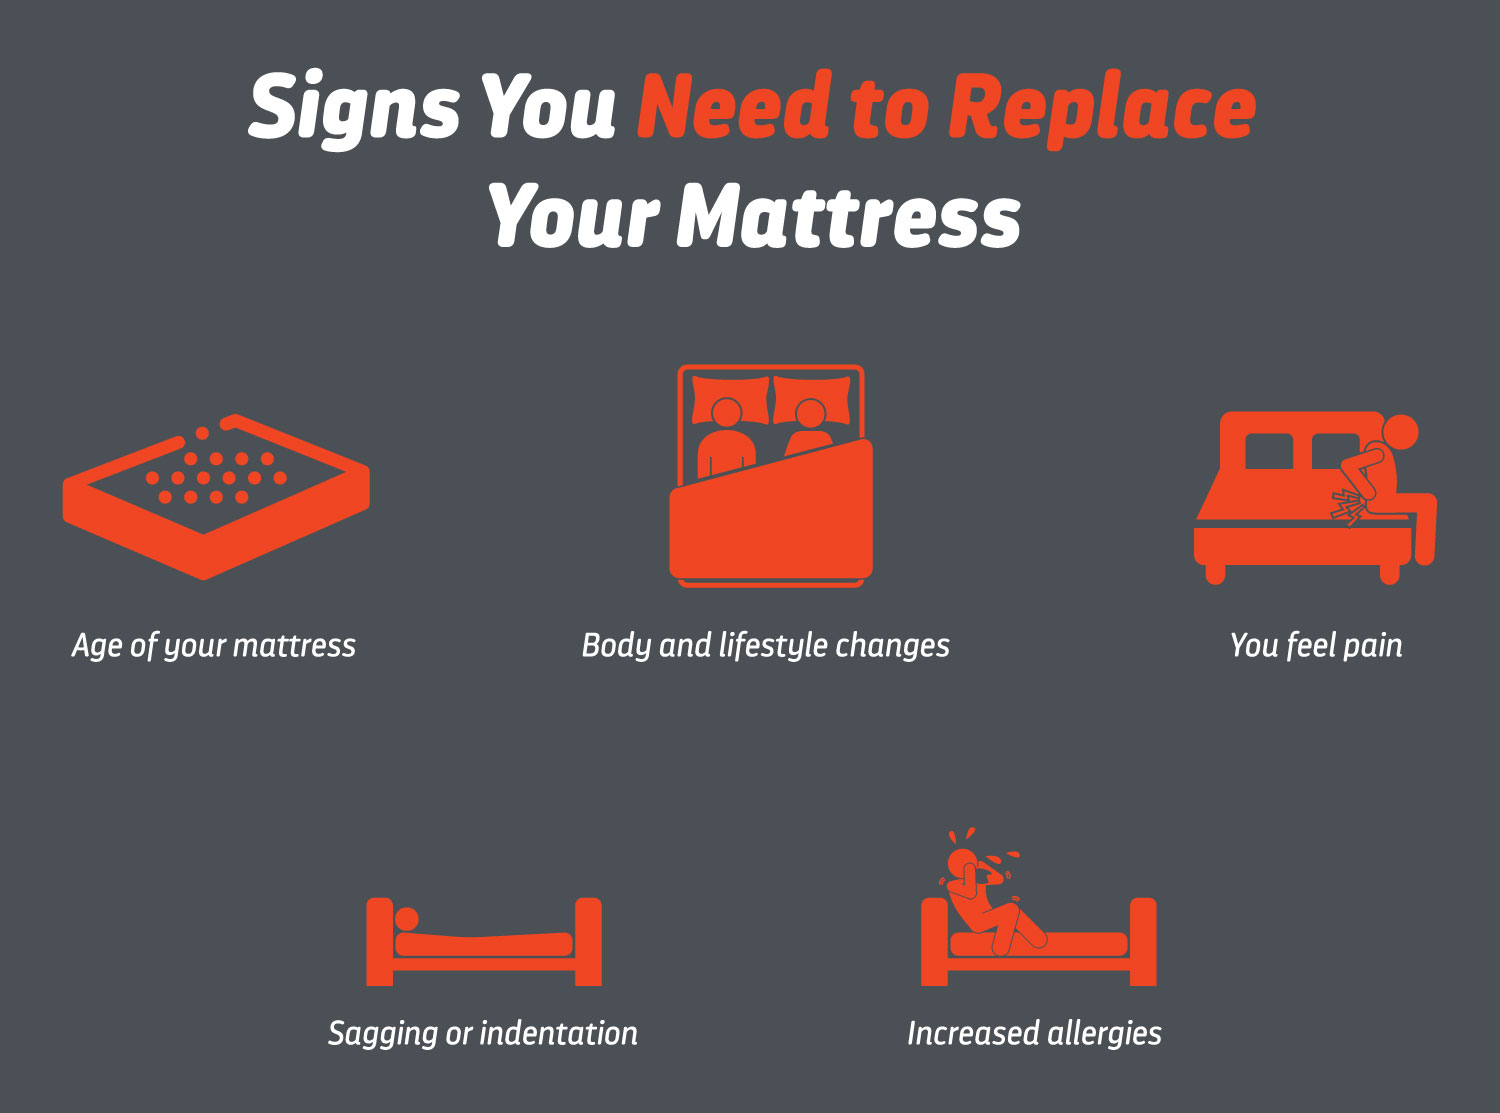 Signs you need to Replace Your Mattress